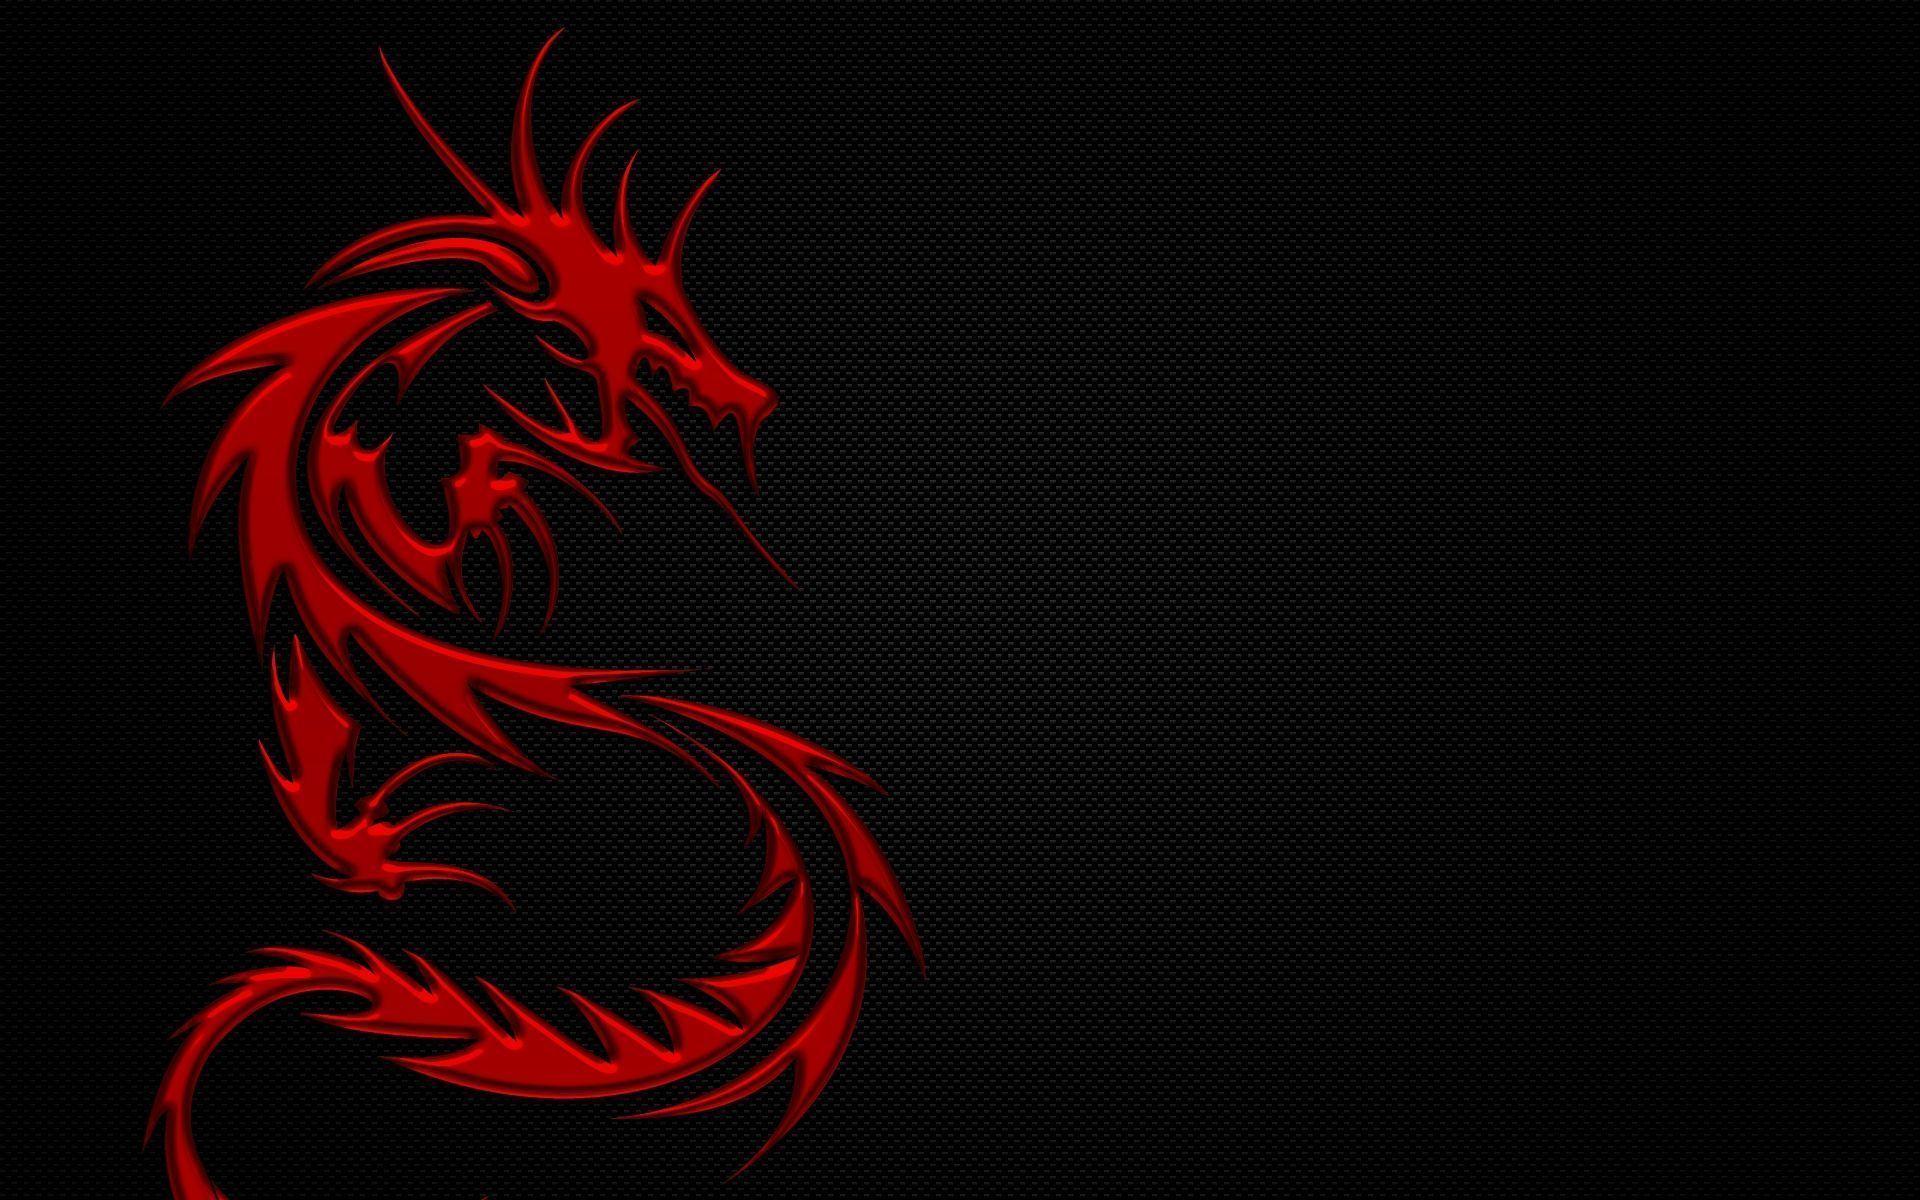 Red Dragon Wallpaper Free Red .wallpaperaccess.com